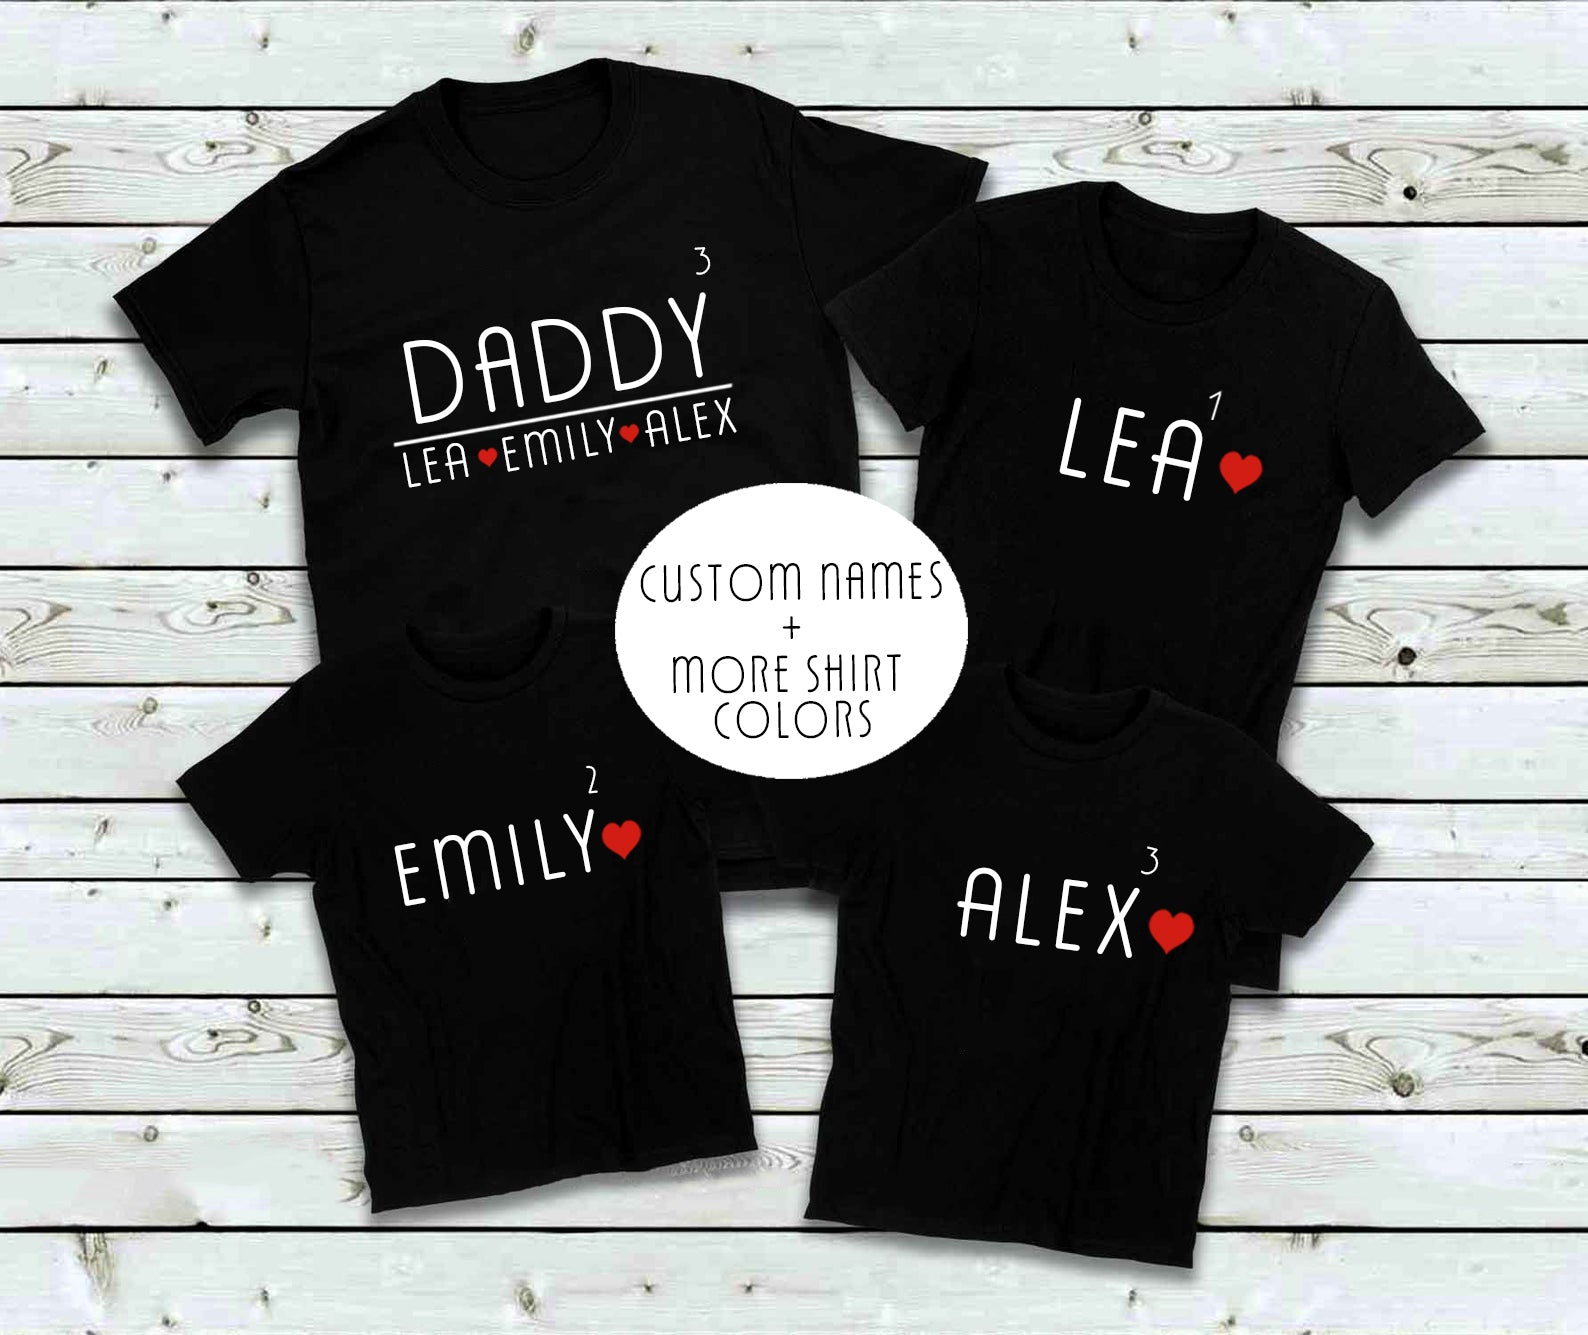 Customizable Father's Day T-shirt DADDY Custom Kids Name Shirt Mens T-shirt Gift for Dad CHANGE NAMES Best Fathers Day Tshirt